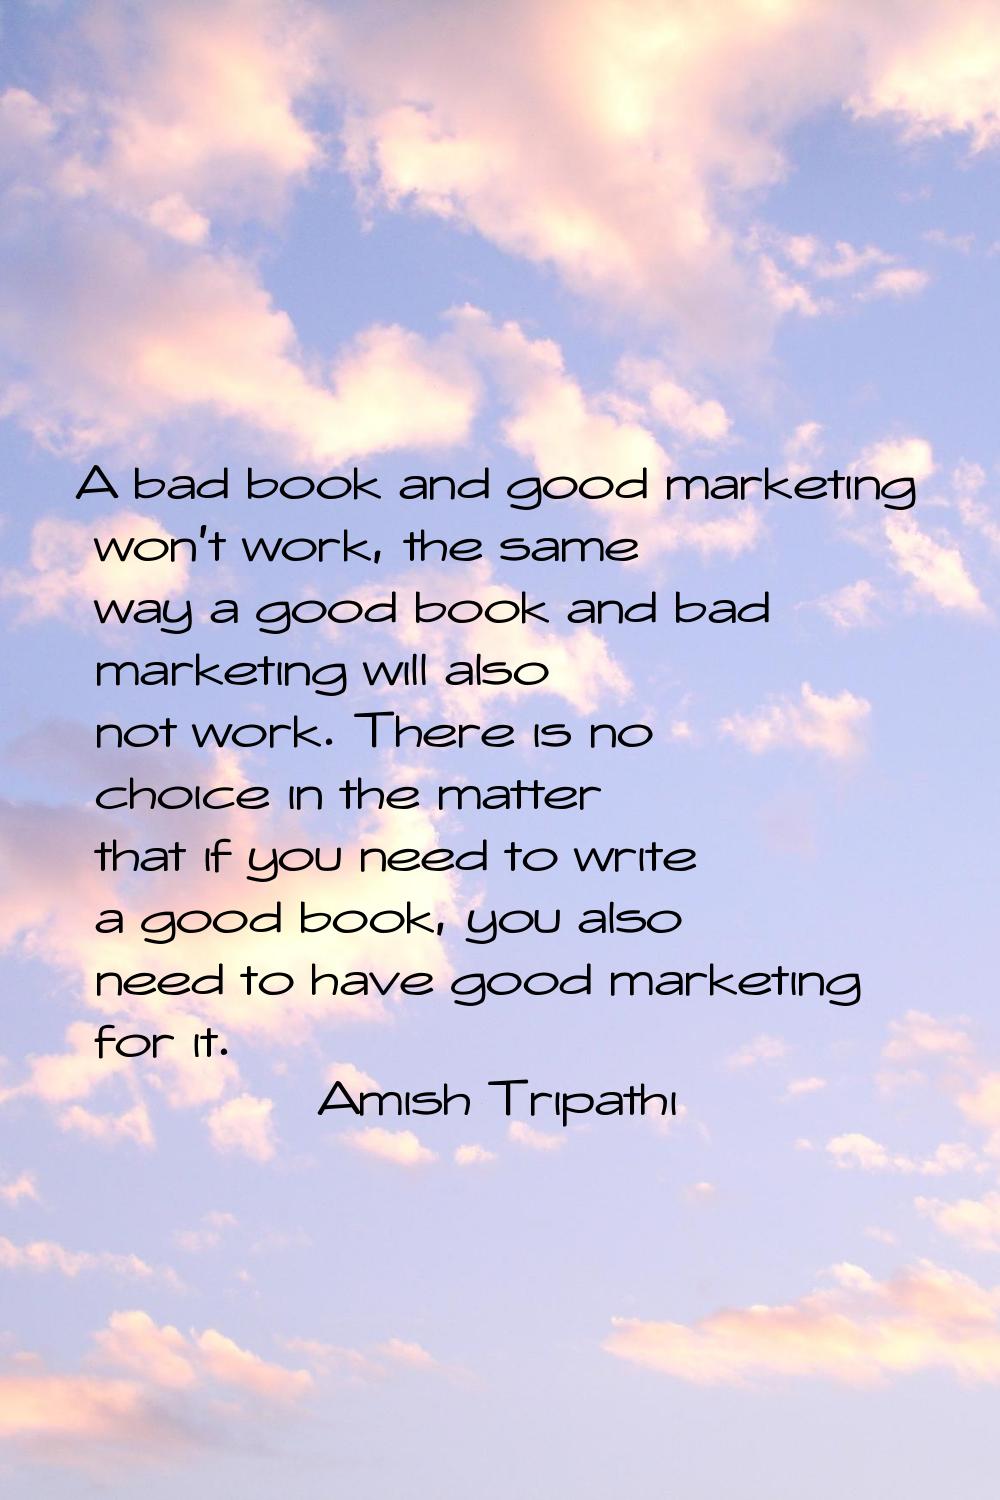 A bad book and good marketing won't work, the same way a good book and bad marketing will also not 